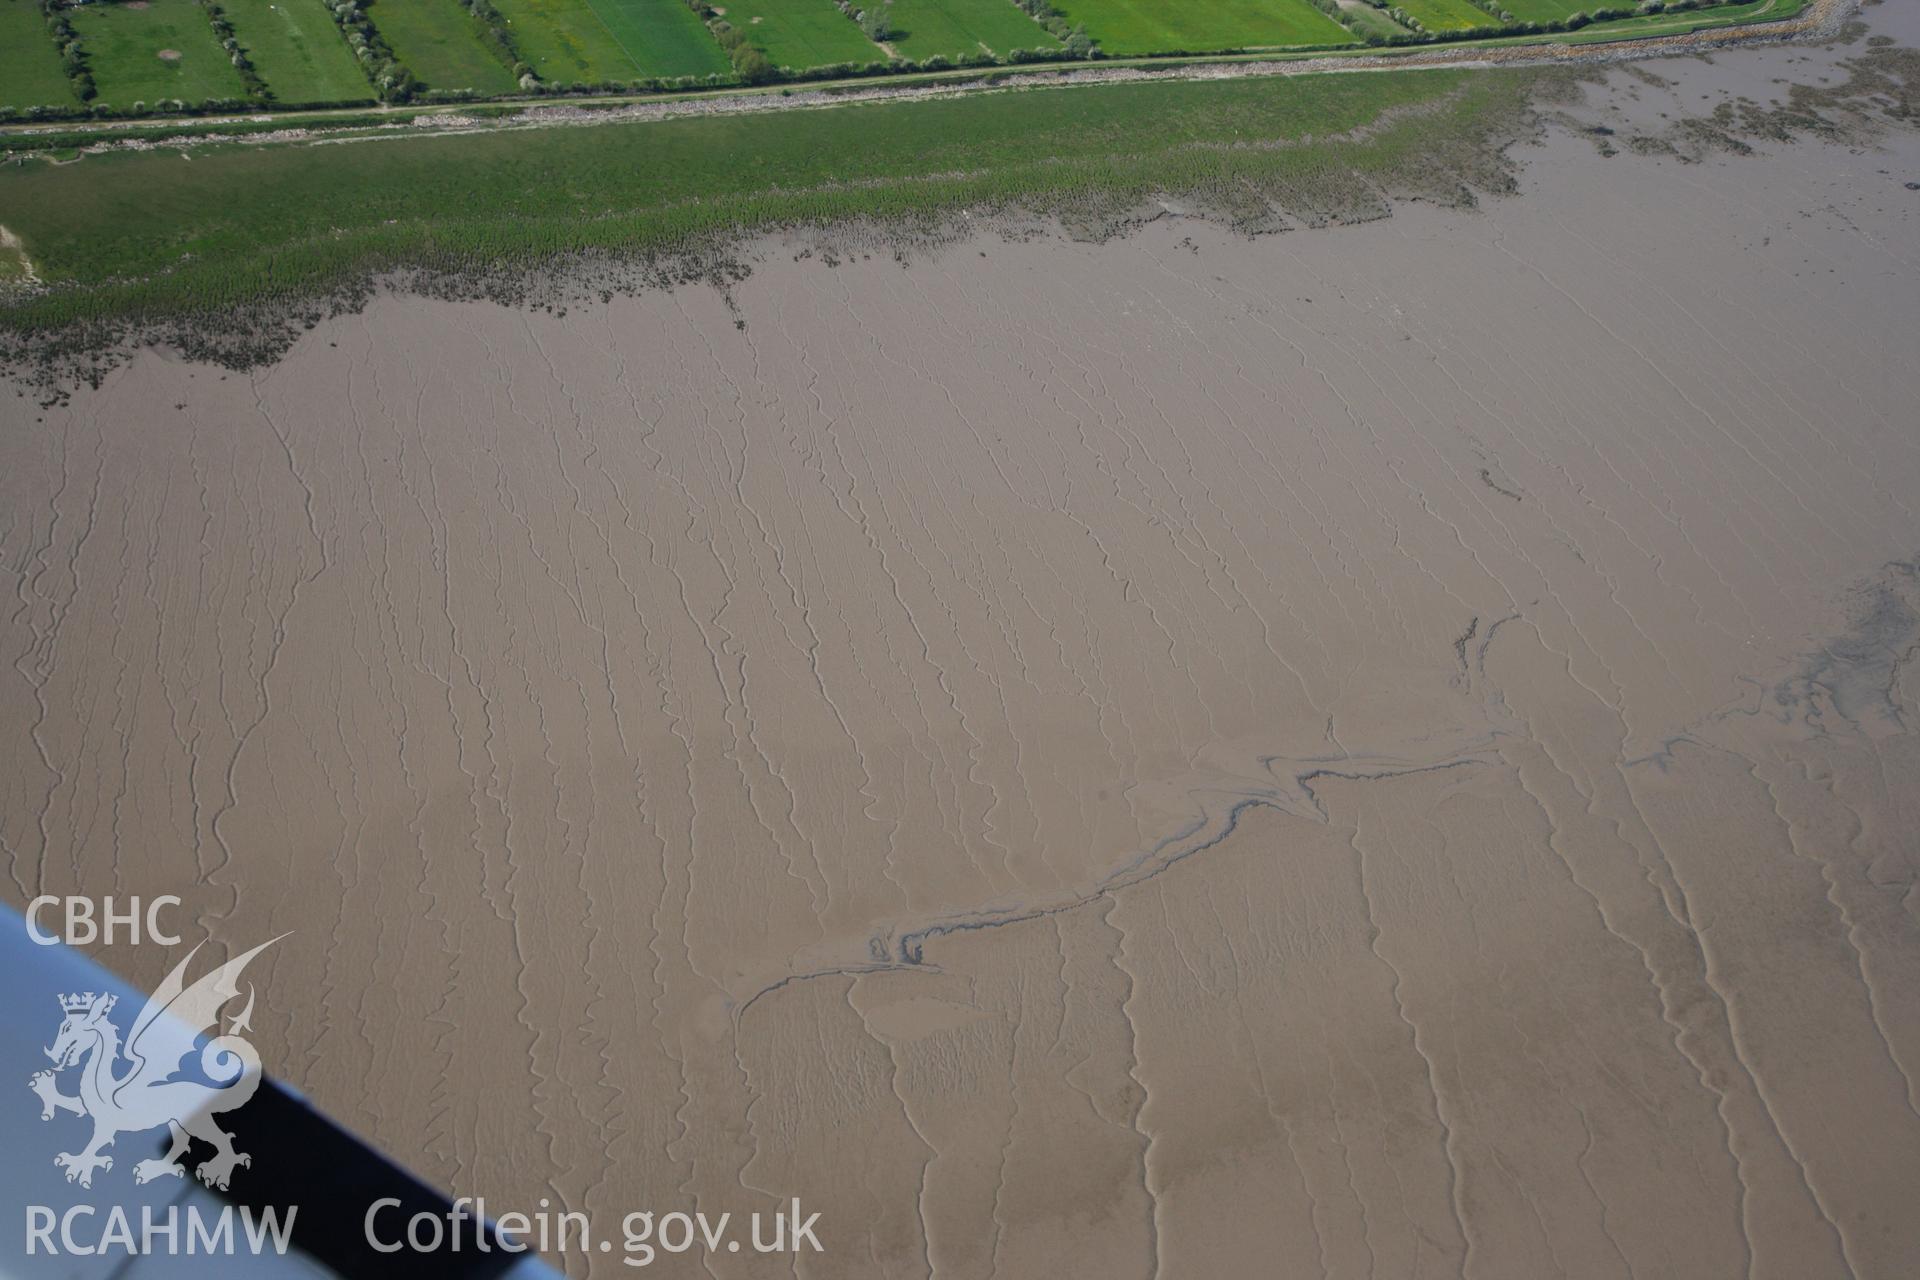 RCAHMW colour oblique photograph of Wentlooge Levels and intertidal area. Taken by Toby Driver on 22/05/2012.